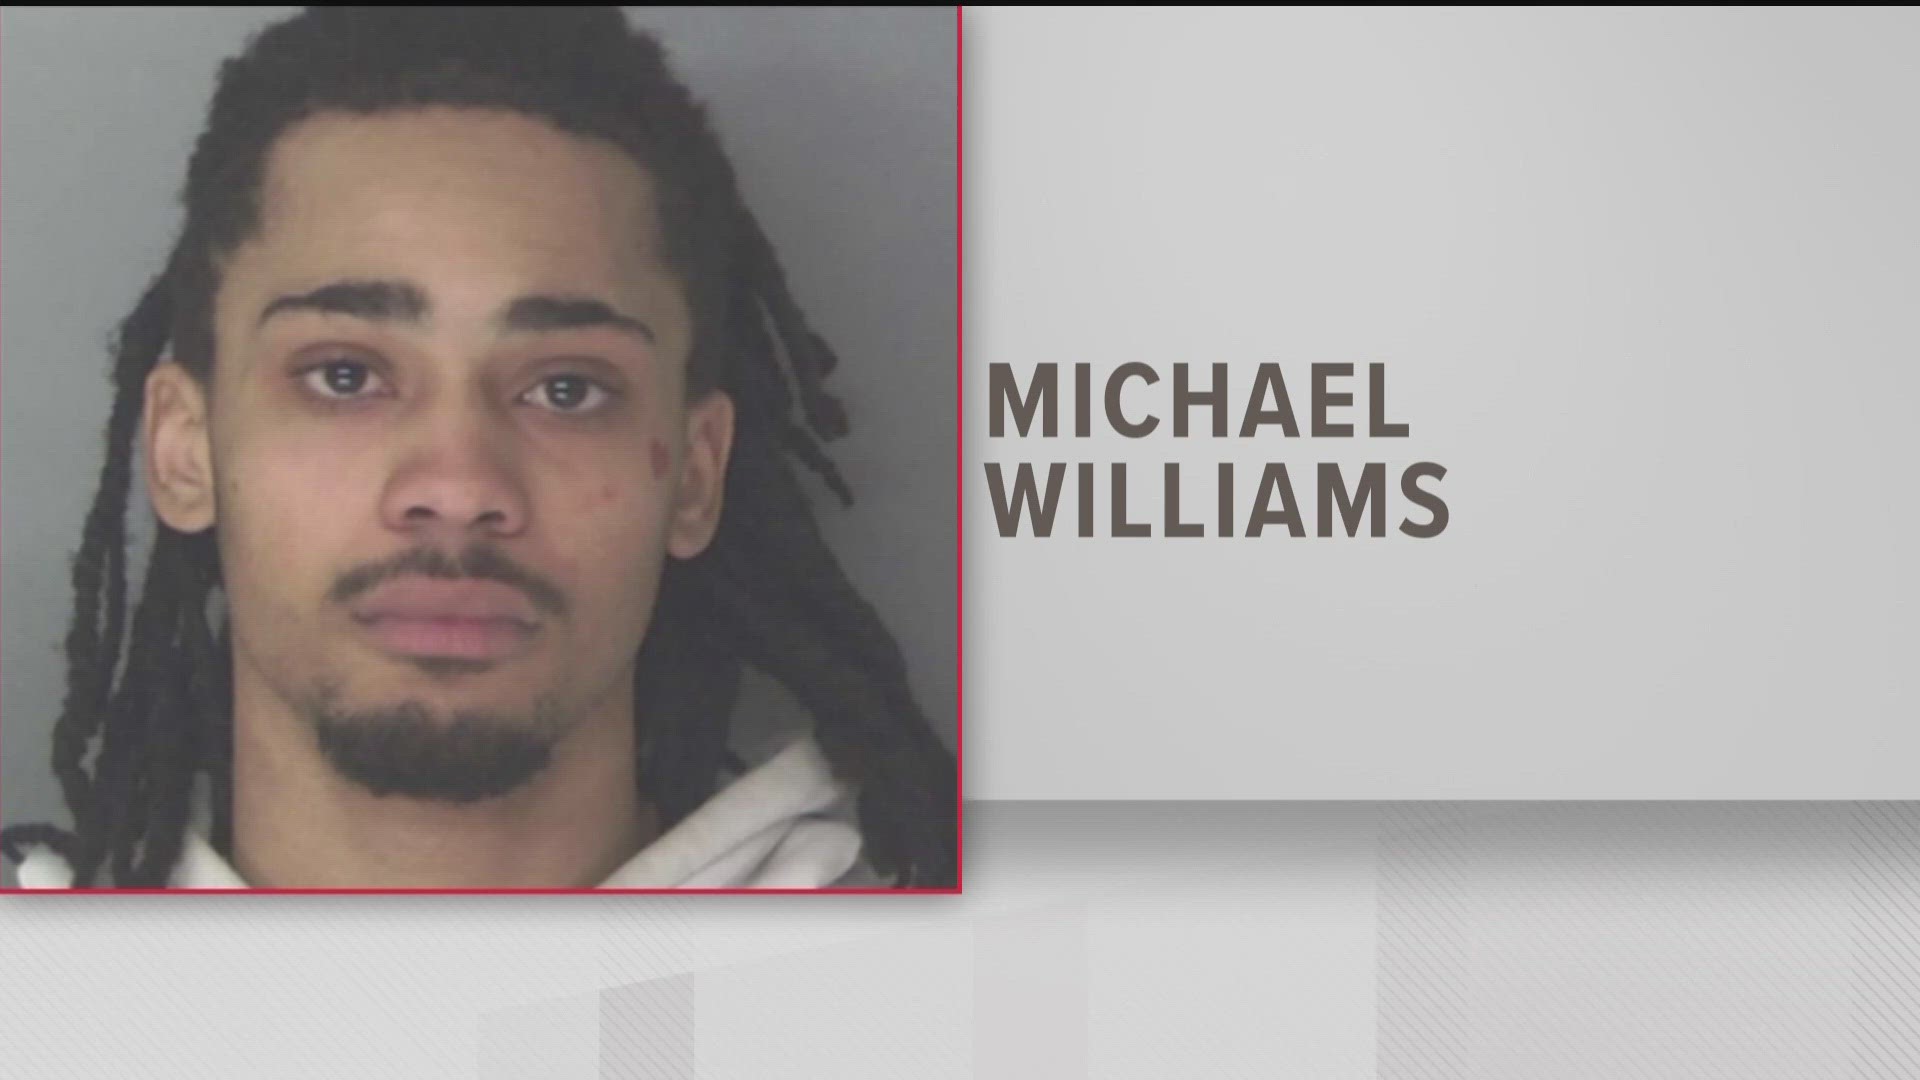 Deputies said they arrested 21-year-old Michael Williams in connection to the shooting.